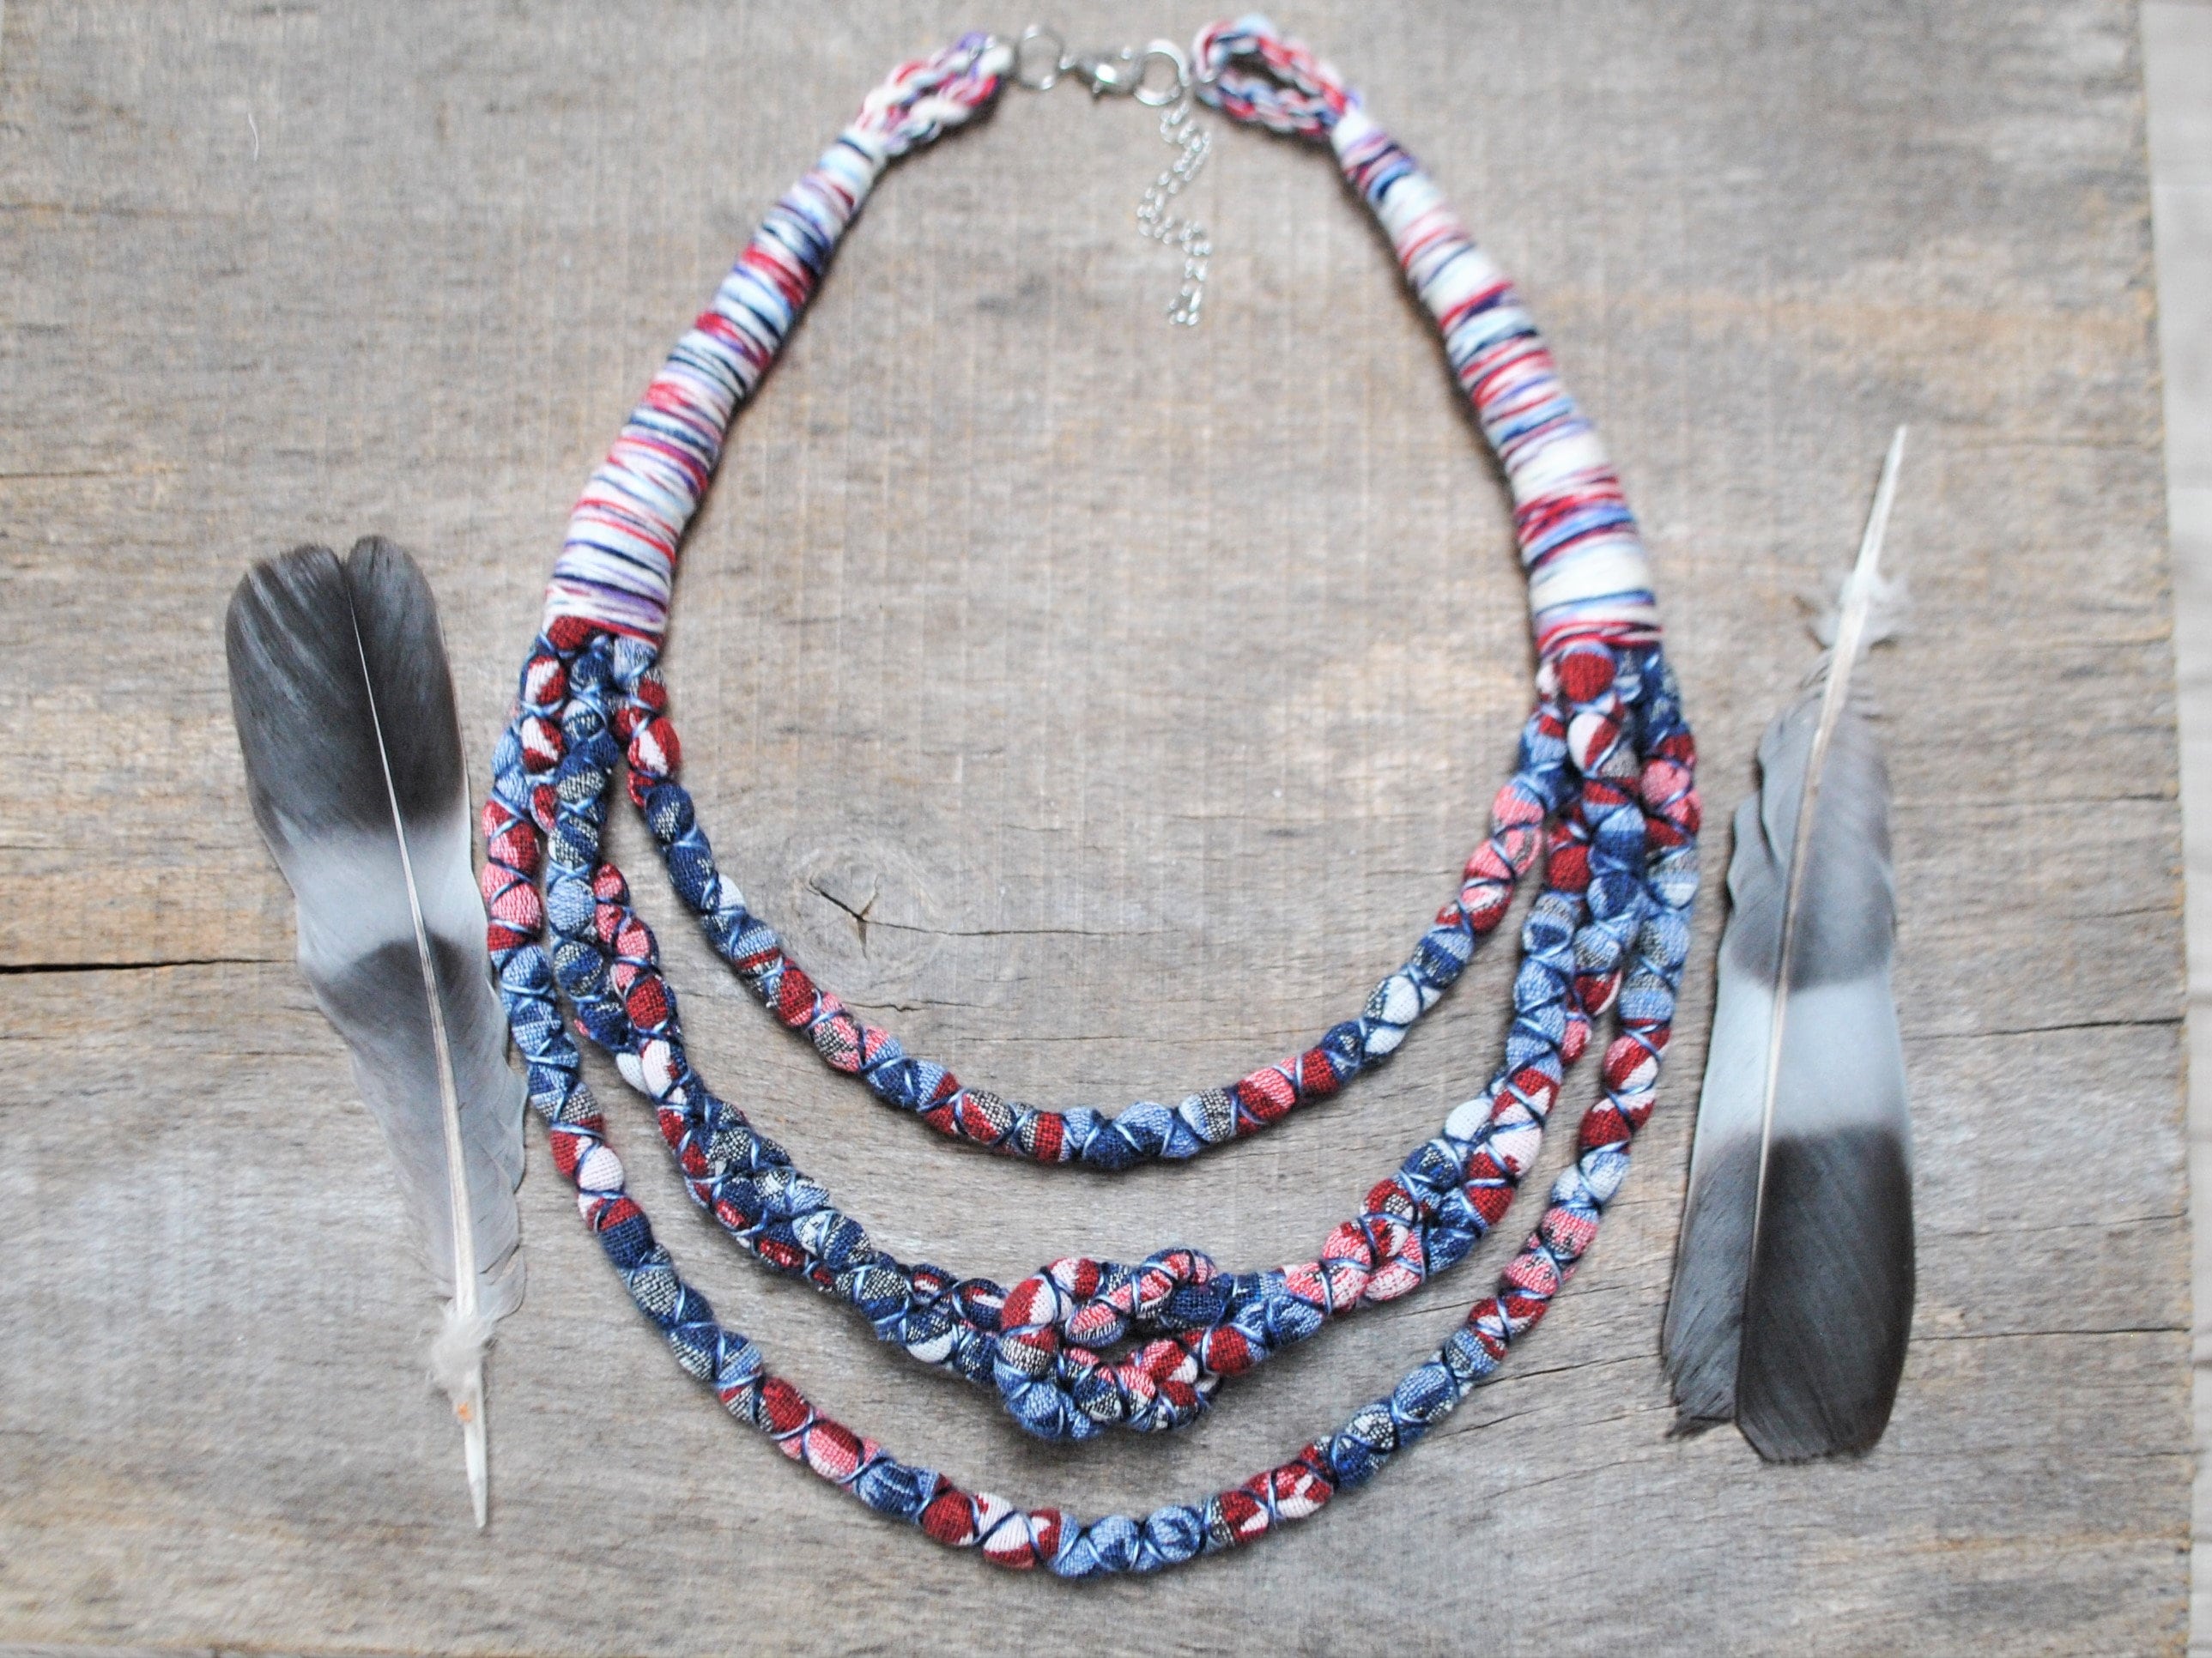 woven textile bib necklace peruvian fabric necklace navy blue statement cord necklace upcycled cloth necklace unique ethnic jewelry